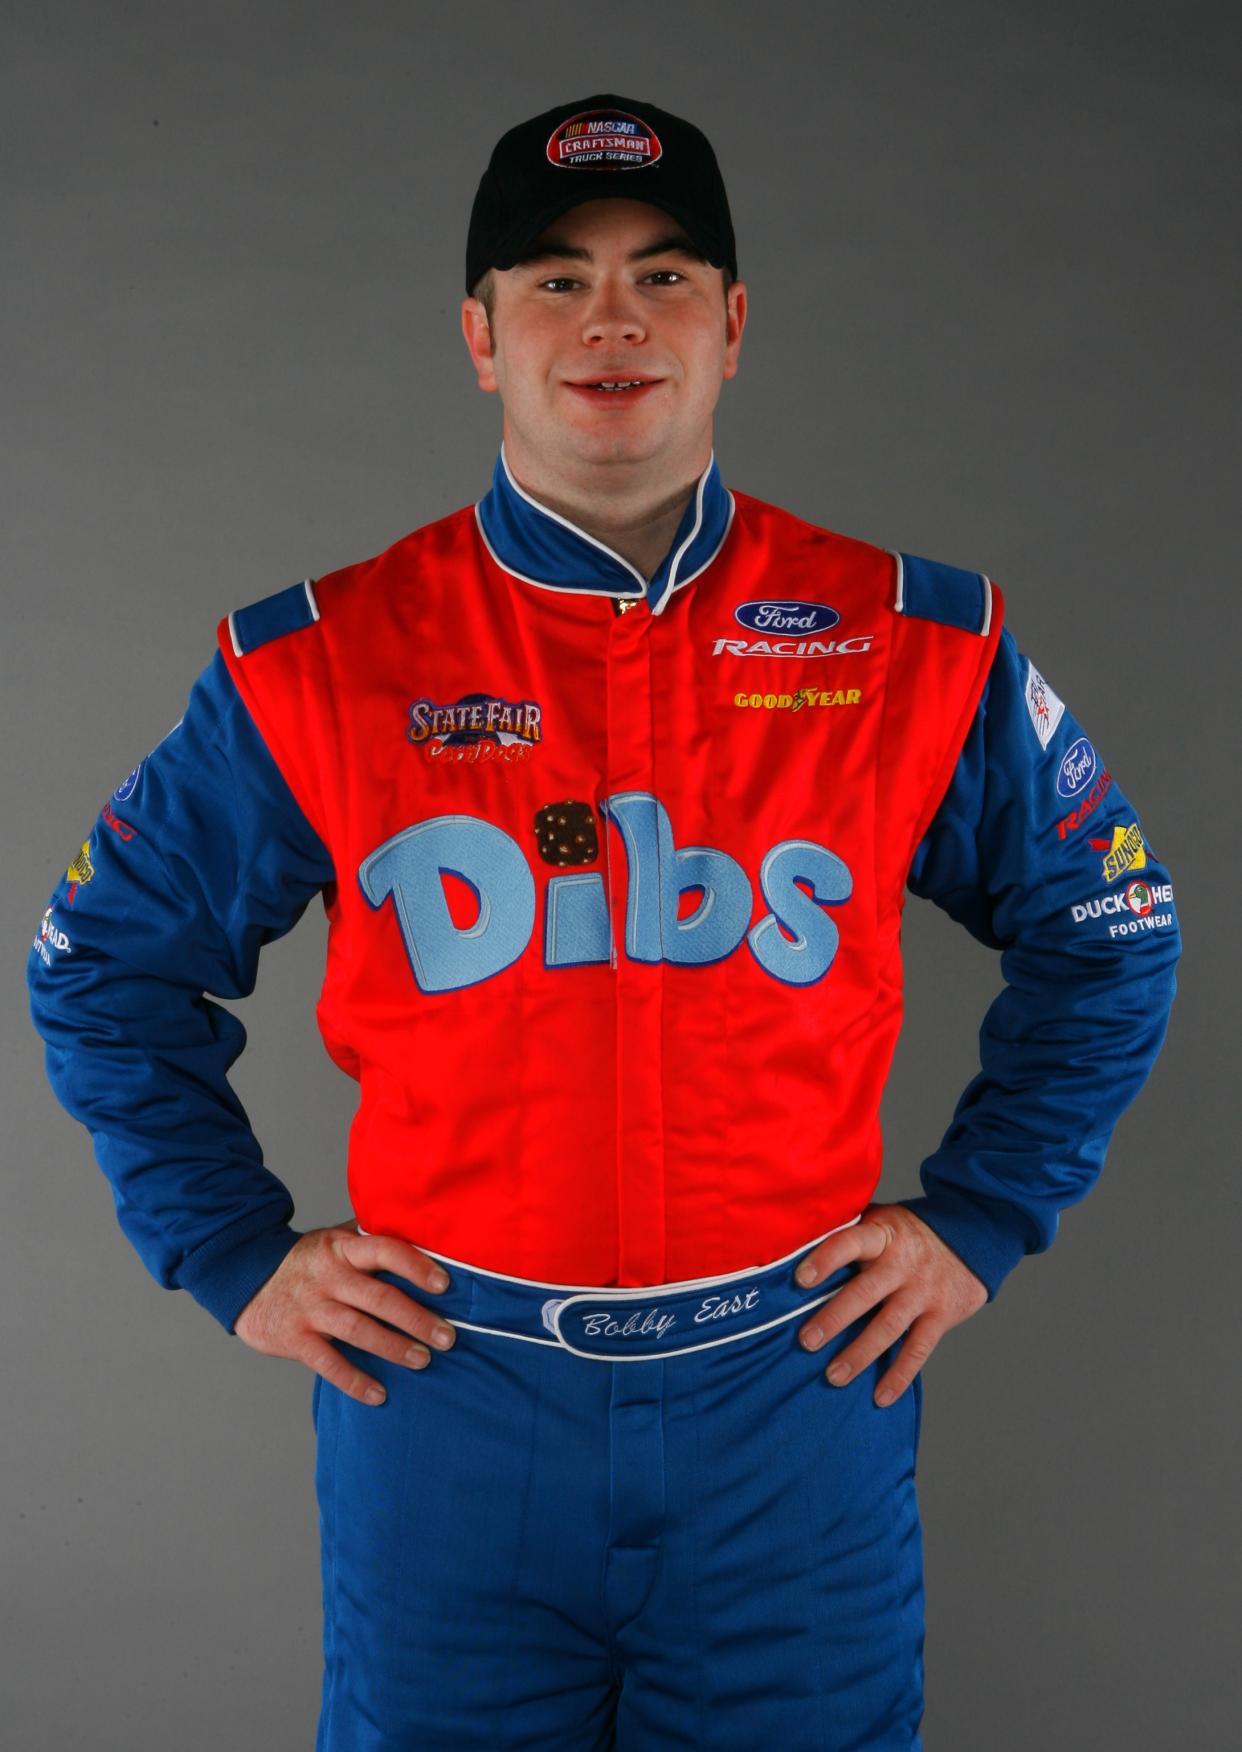 Bobby East poses for a photo during the NASCAR Craftsman Truck Series media day at Daytona International Speedway in 2006. (Rusty Jarrett / Getty Images)